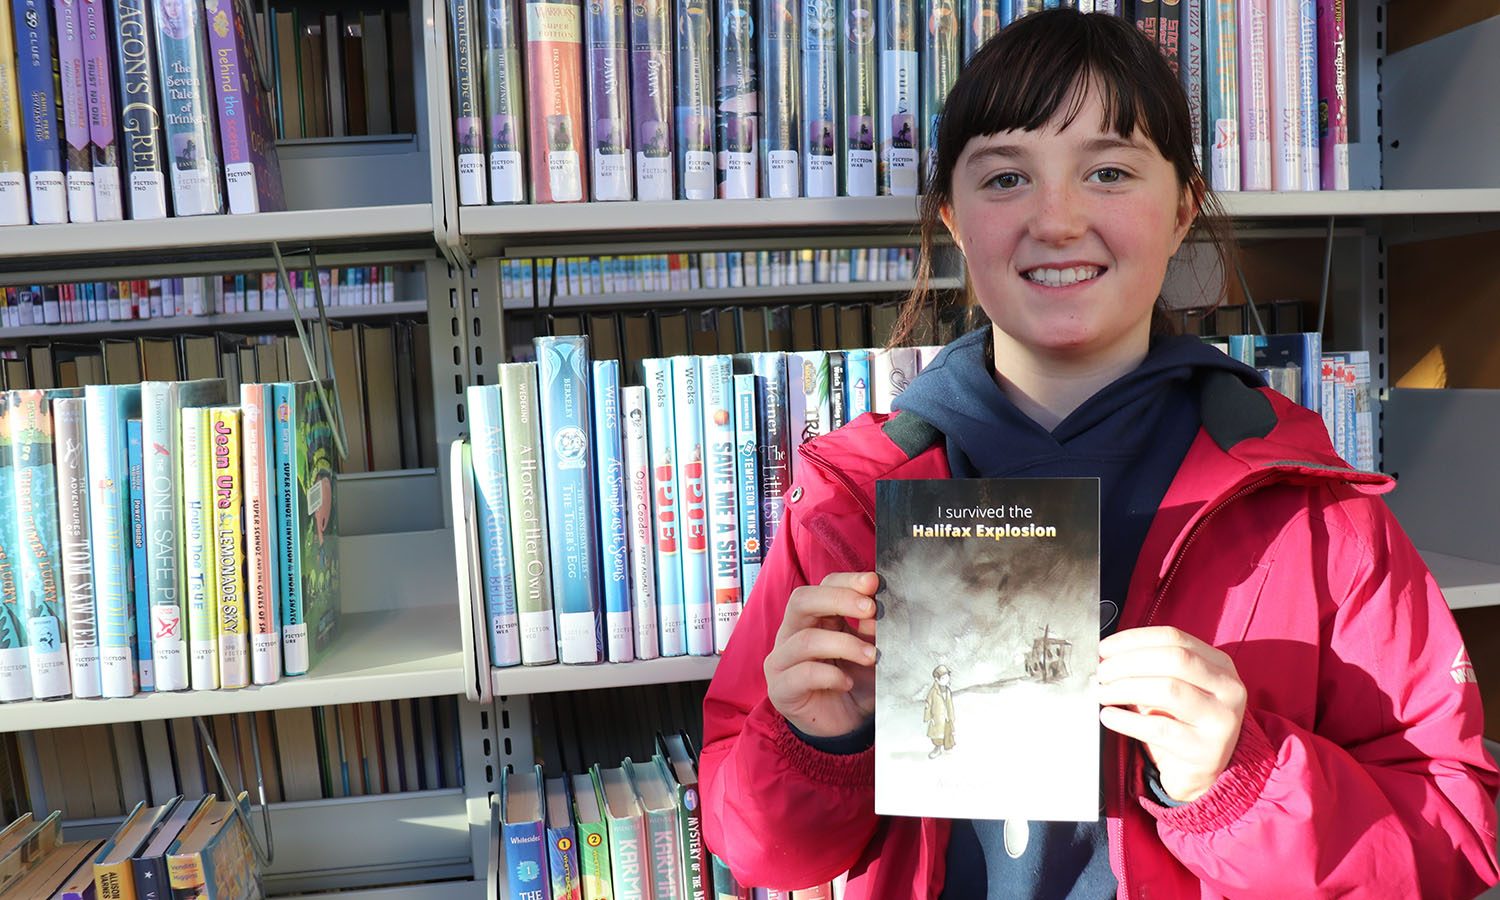 Alice Roebotham, 10, holds her book I Survived the Halifax Explosion.